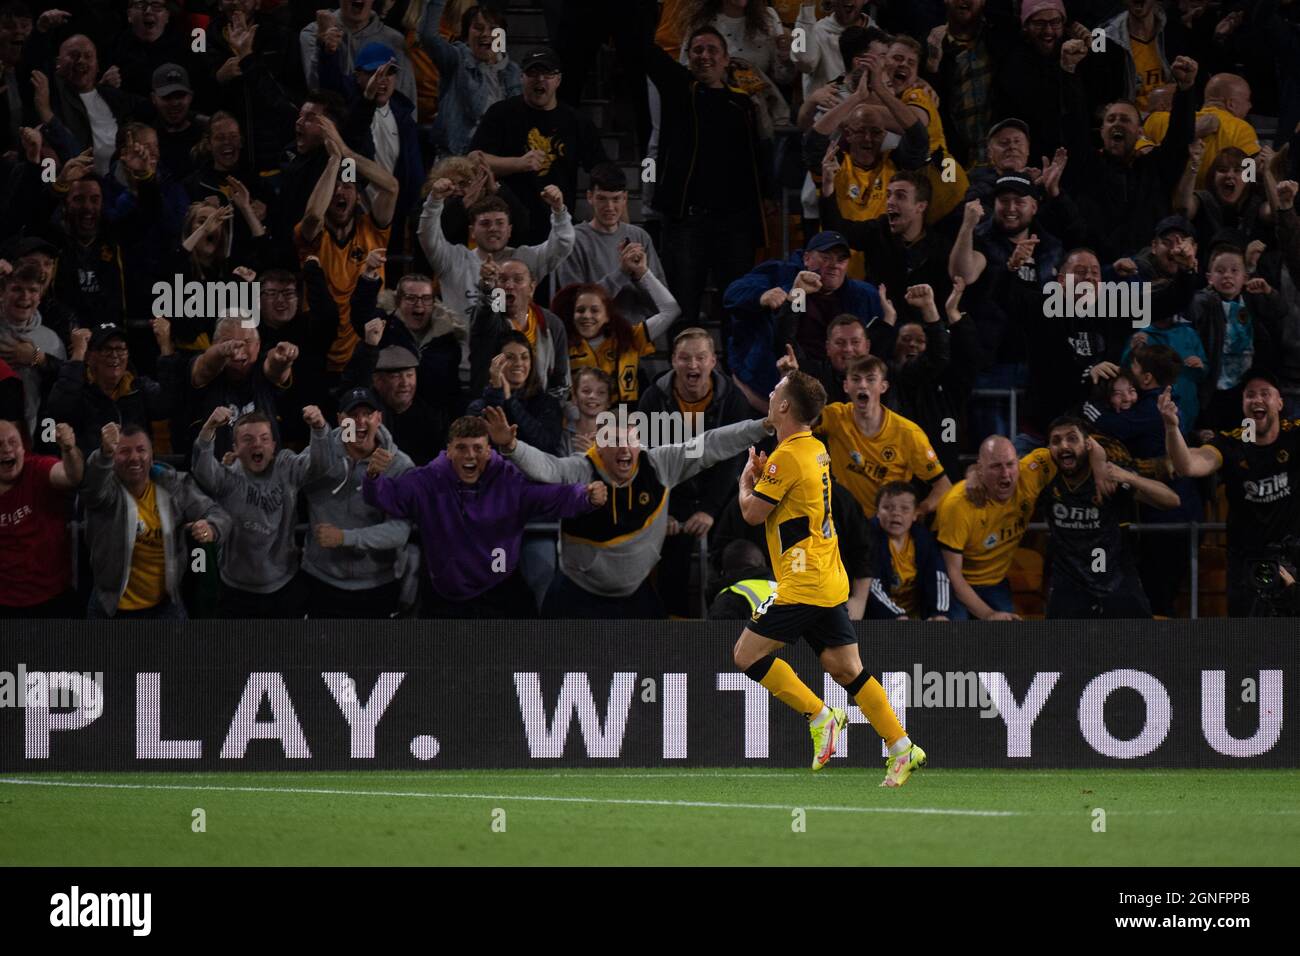 Daniel Podence of Wolverhampton Wanderers celebrate after scoring goal during the Carabao Cup Third Round match between Wolverhampton Wanderers and To Stock Photo